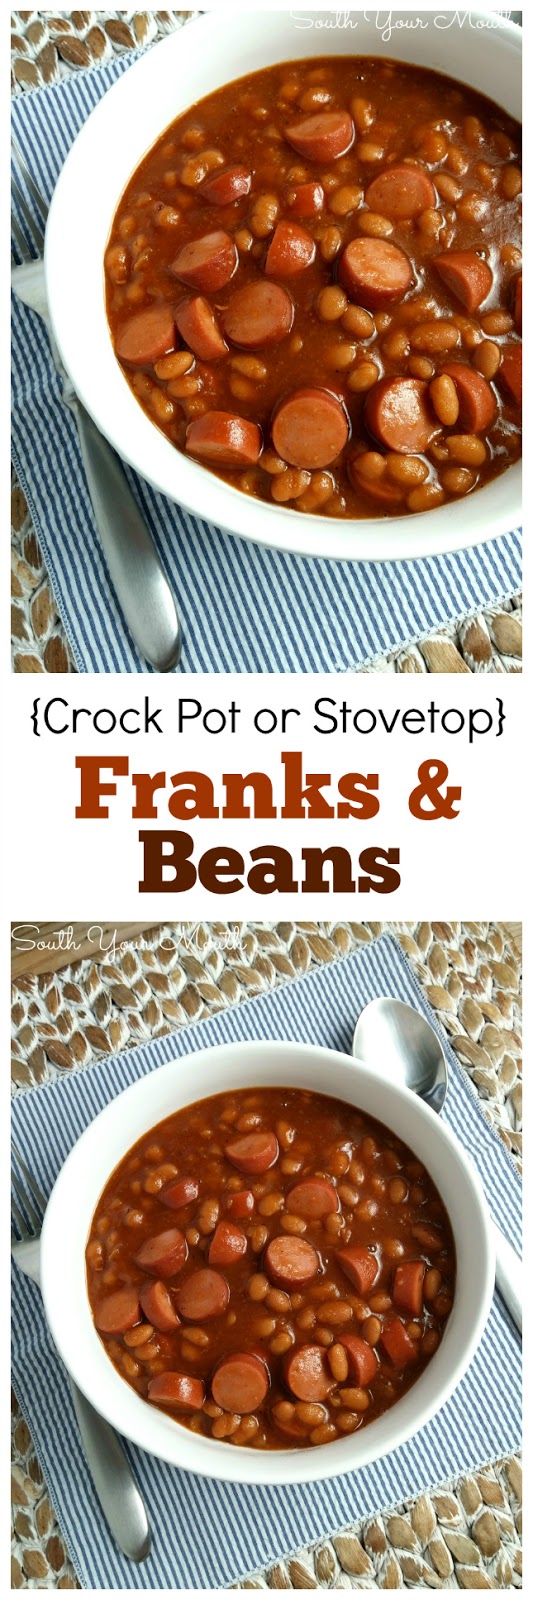 Family-friendly Franks & Beans! Make these on the stove or in a crock pot. Love me some Beanie Weenies!